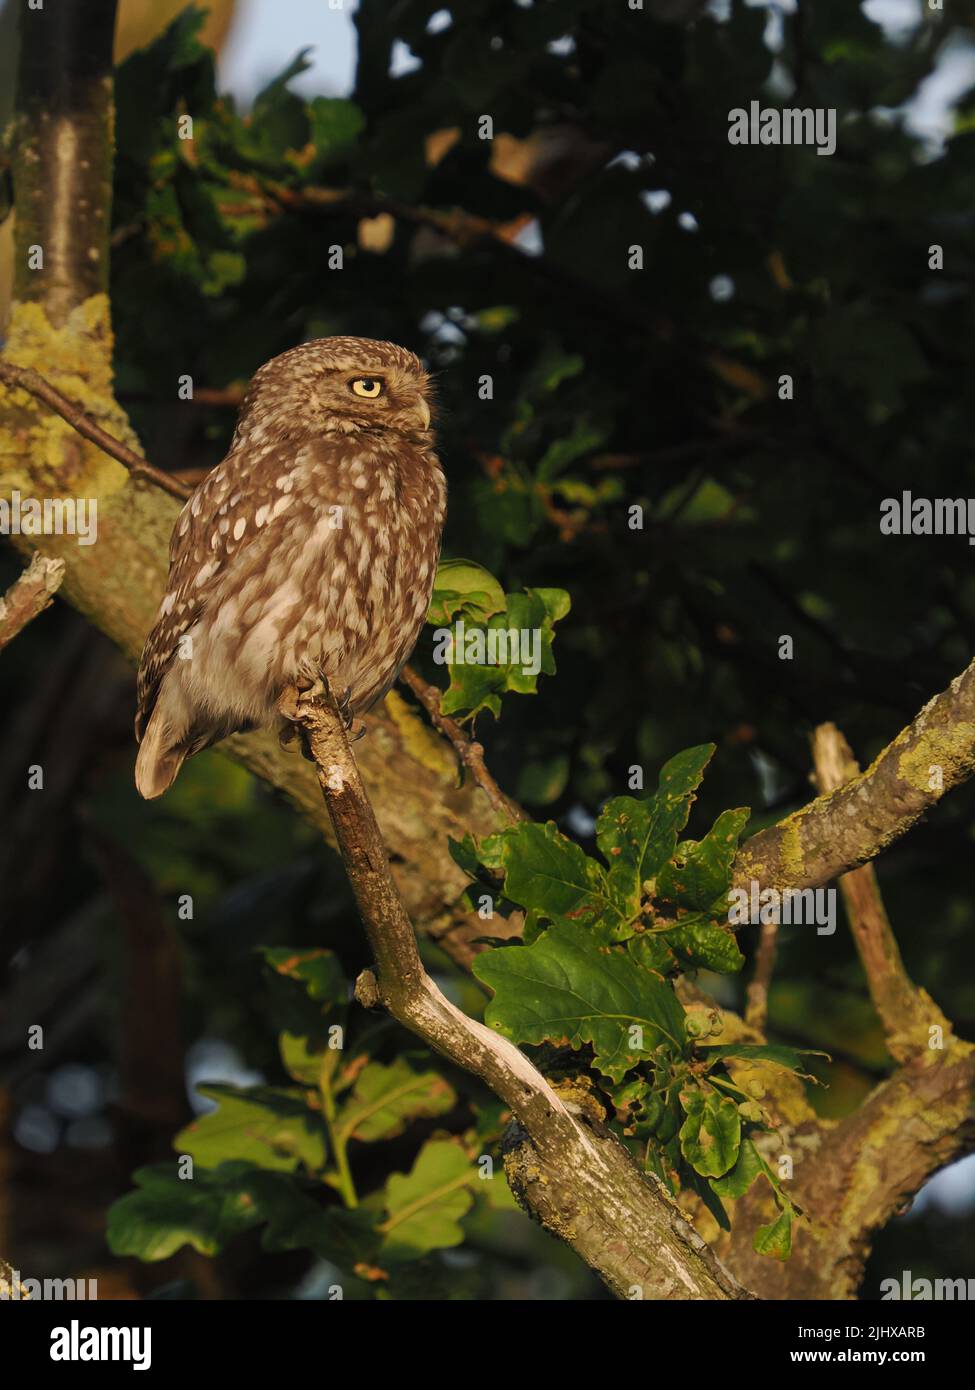 Little owl have favourite perches they use, often near farms or agricultural land. Stock Photo